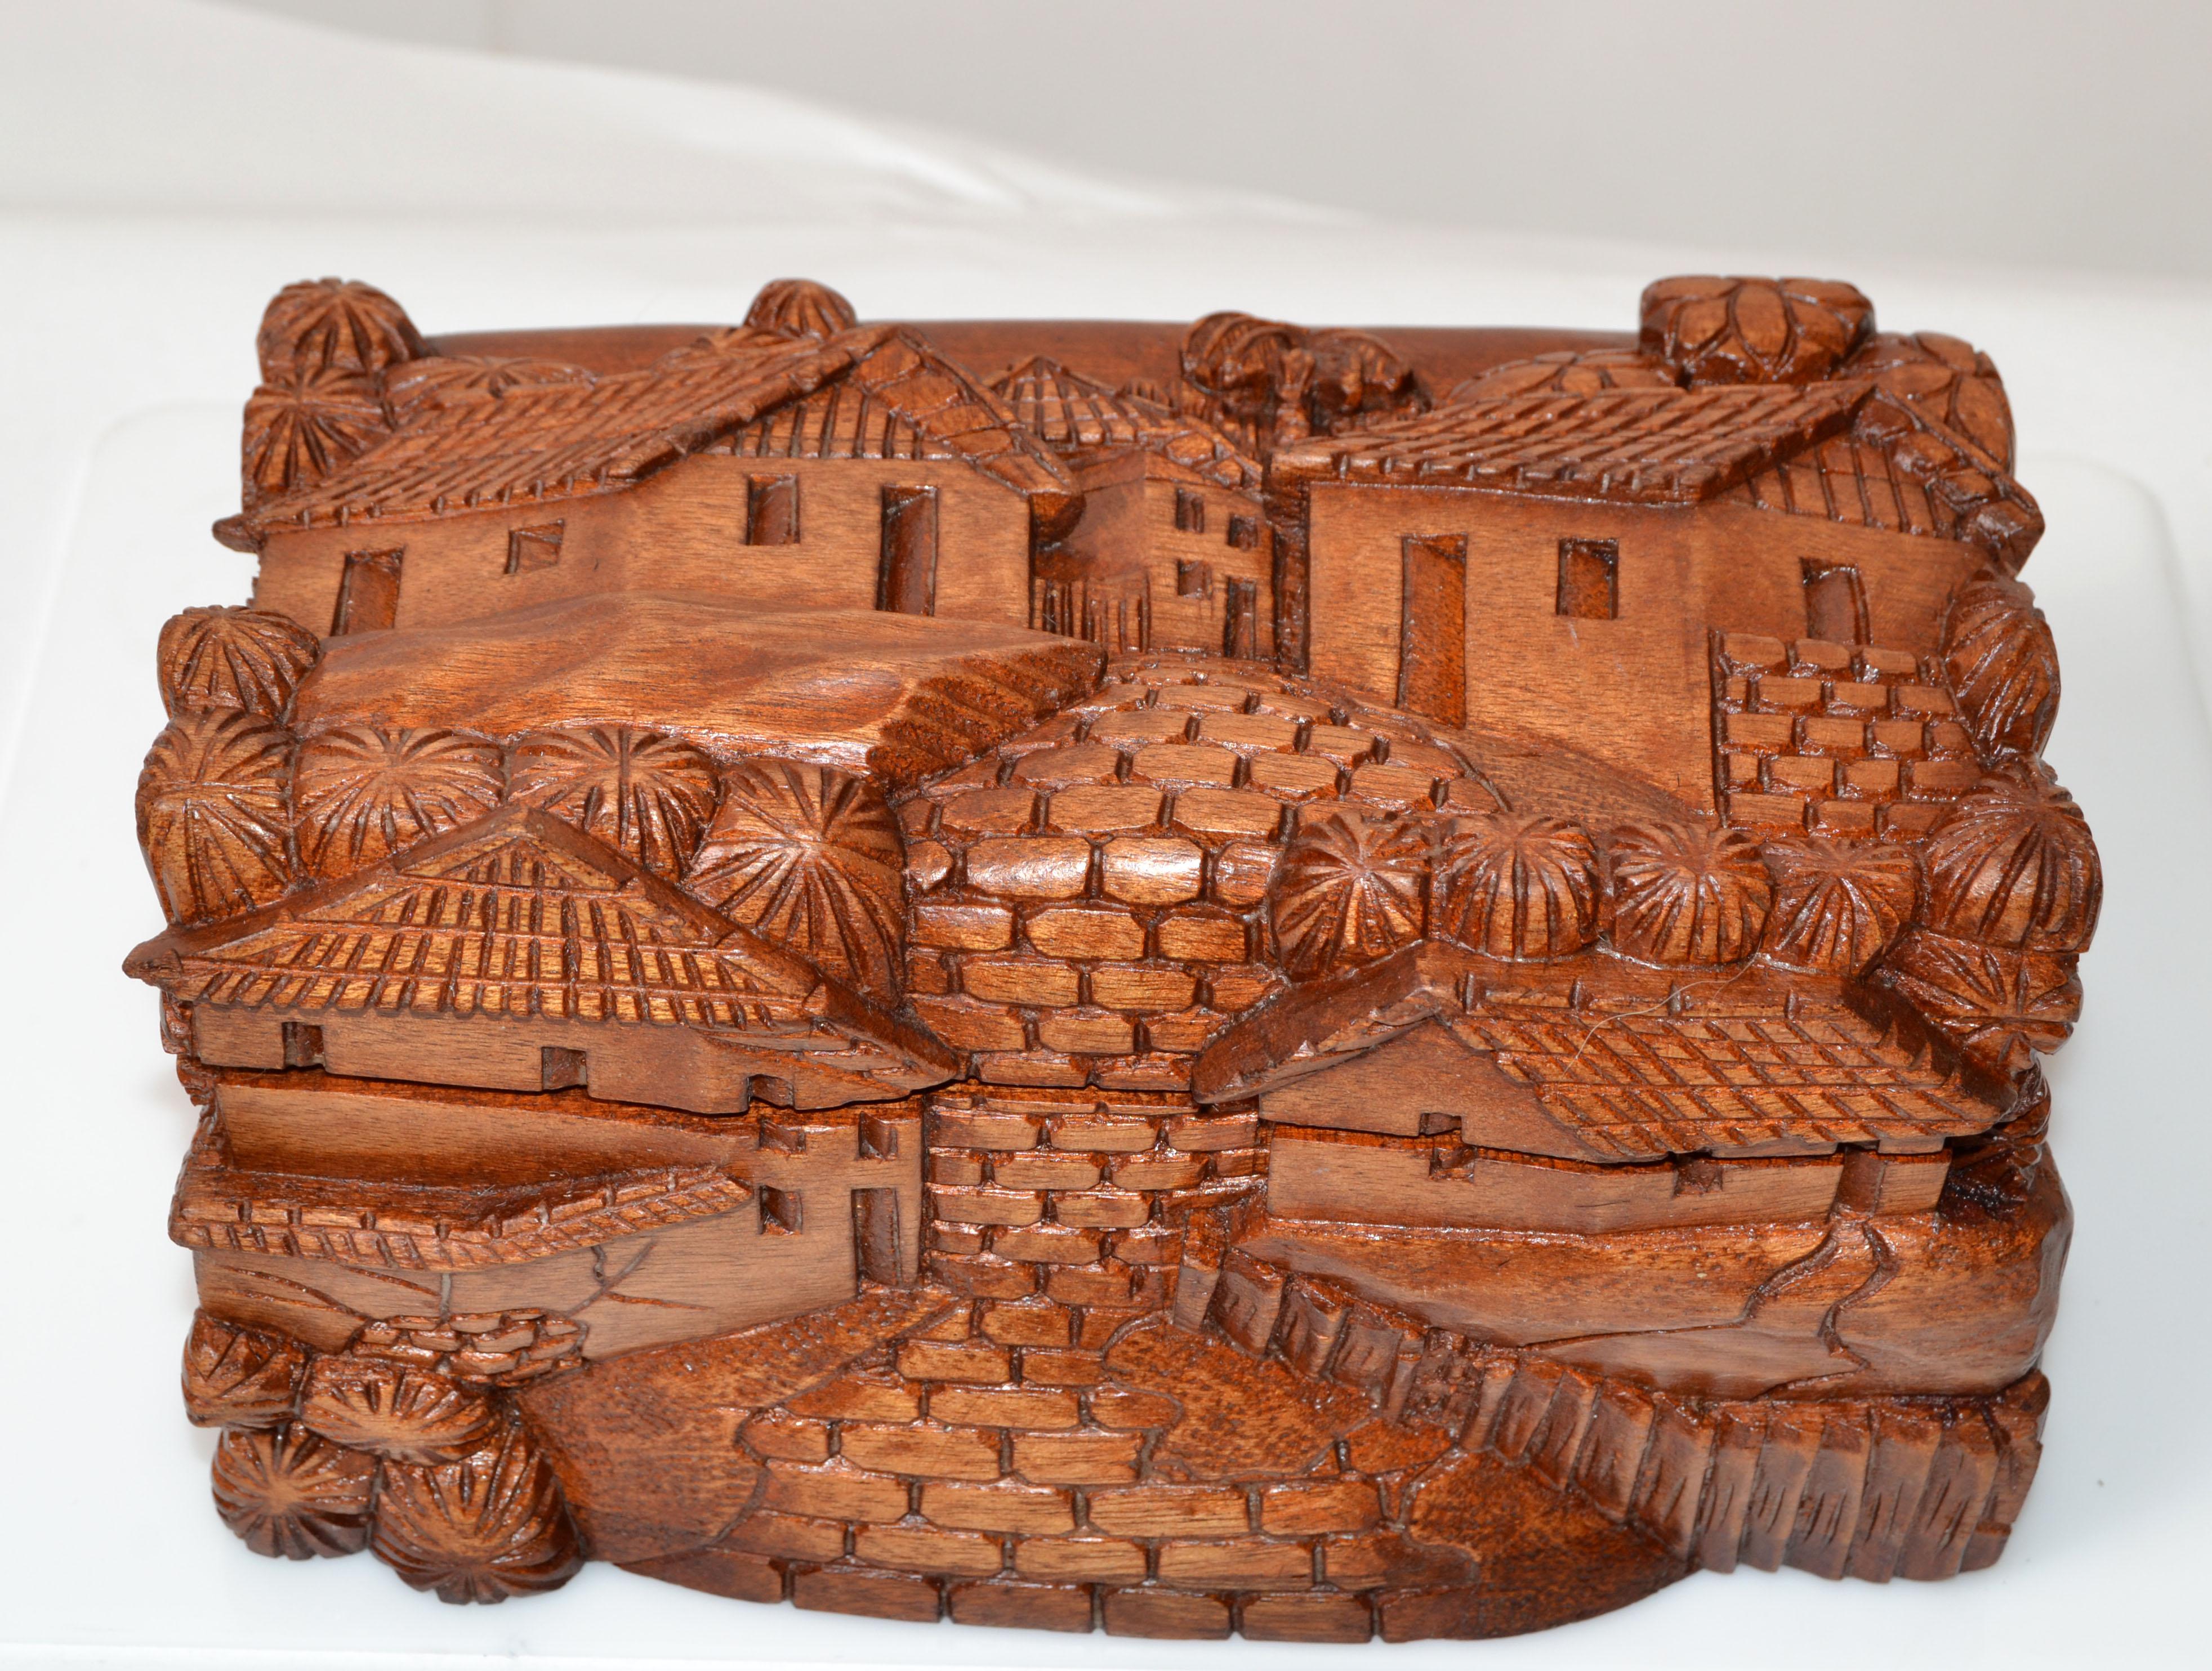 Vintage handmade beautifully carved wooden trinket box, jewelry box or keepsake box.
Depicting a village scene with Houses & Palm Trees.
Folk Art handmade in South America. No makers mark.
 